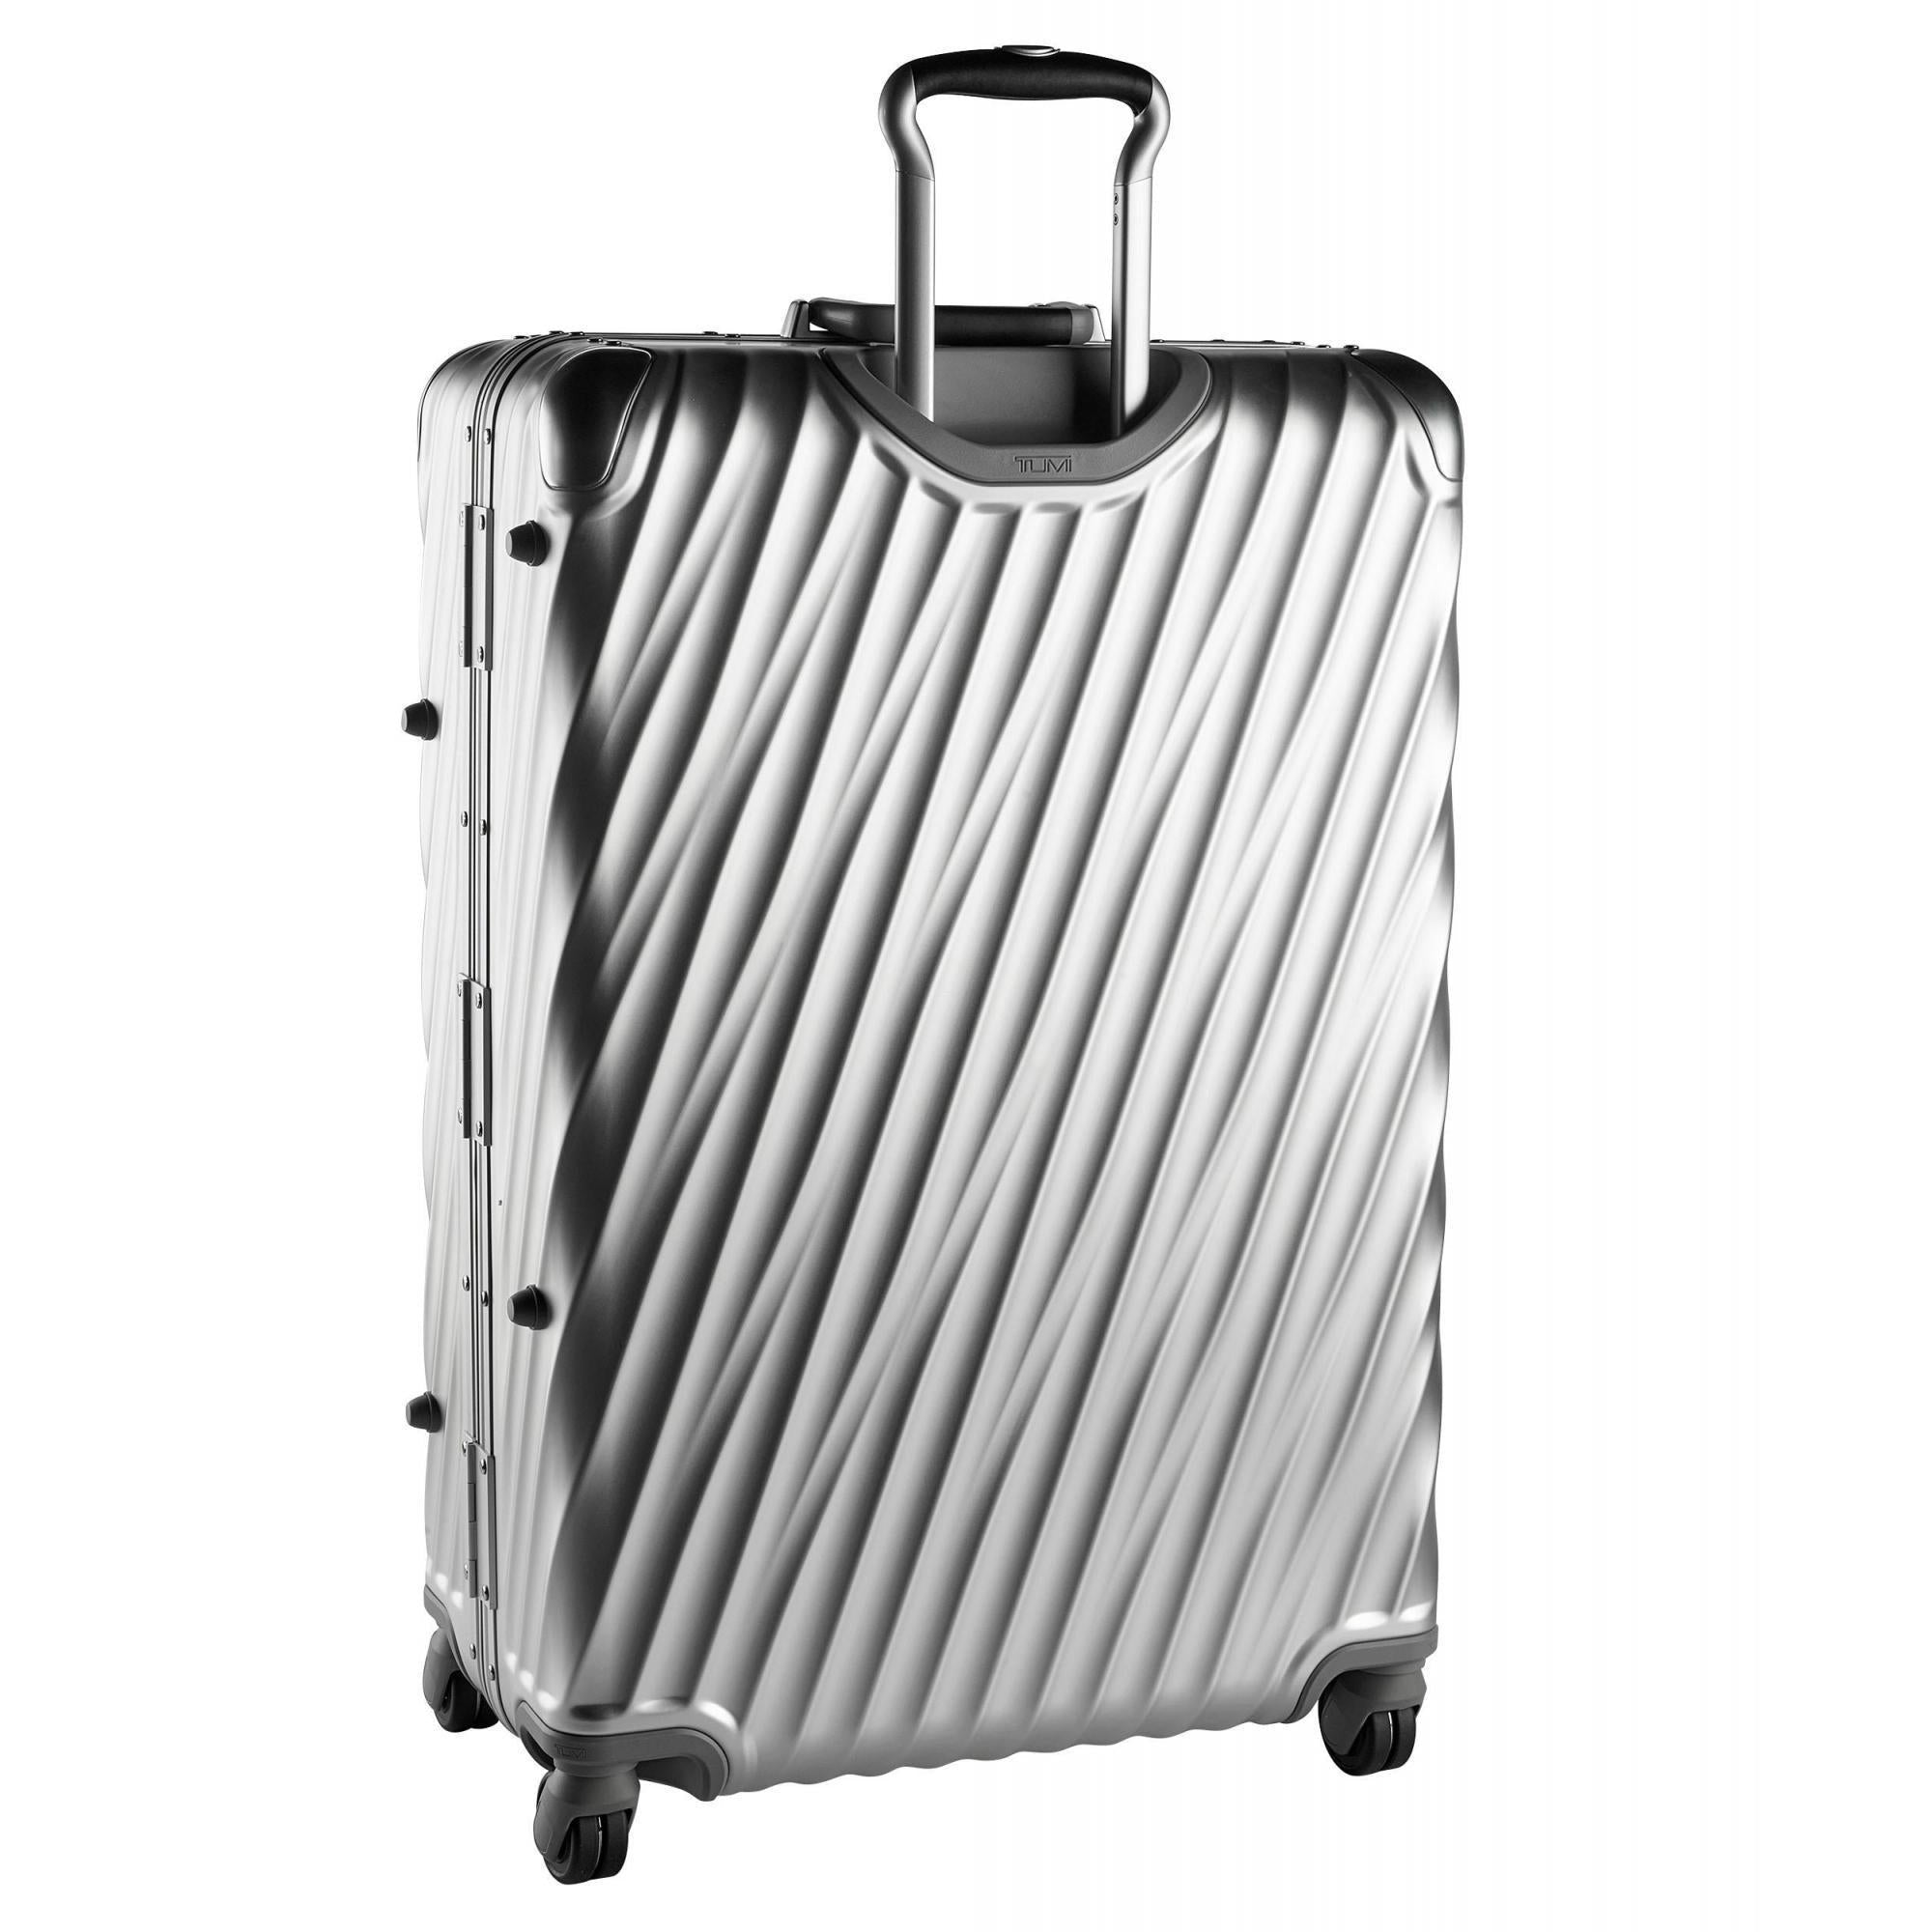 TUMI 19 Degree Extended Trip Packing Case in Red - 139686-1726